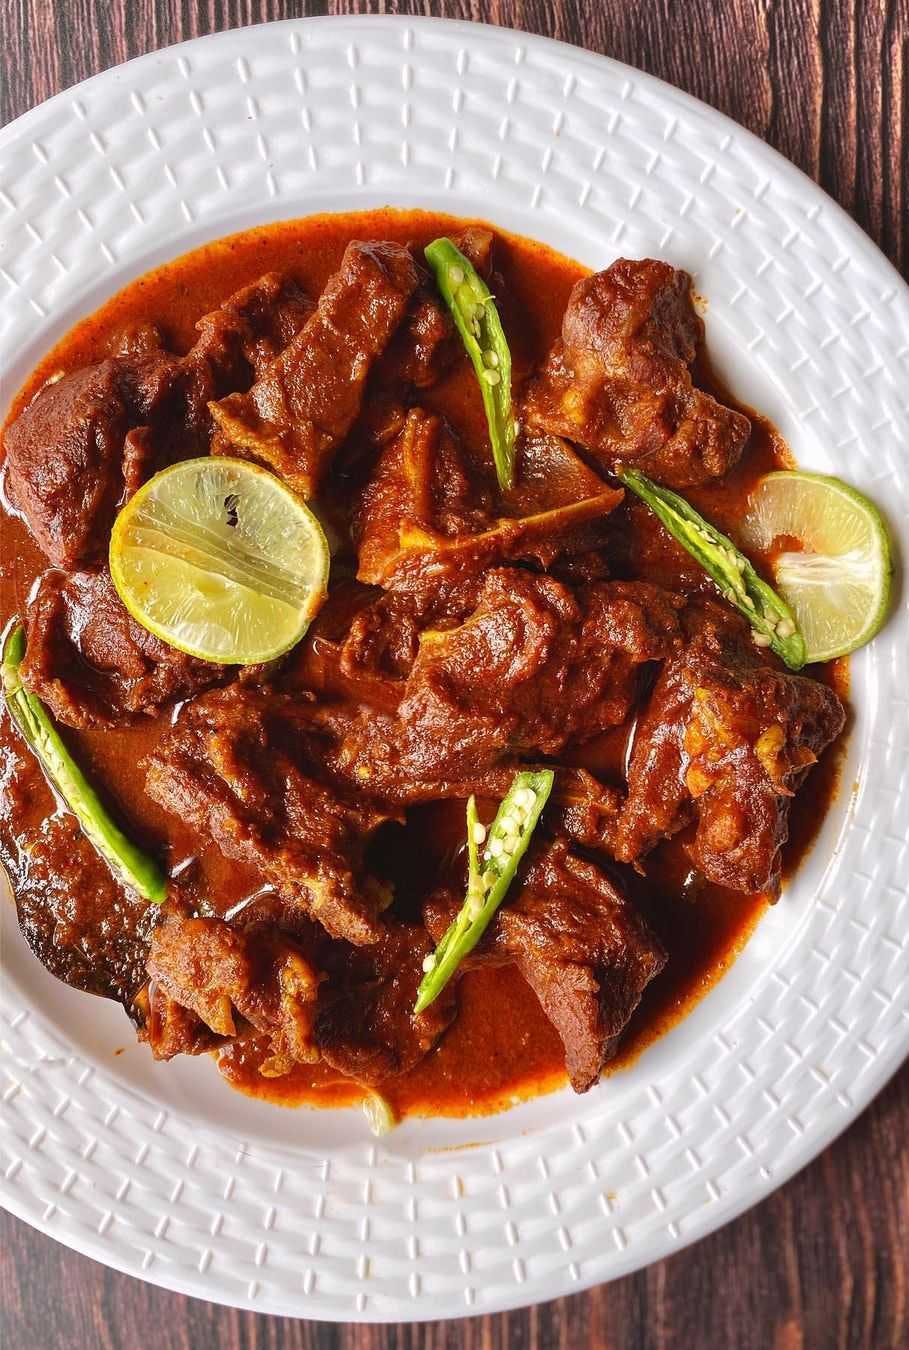 Kosha Mangsho: The Tale Of Love For Mutton Or Chicken